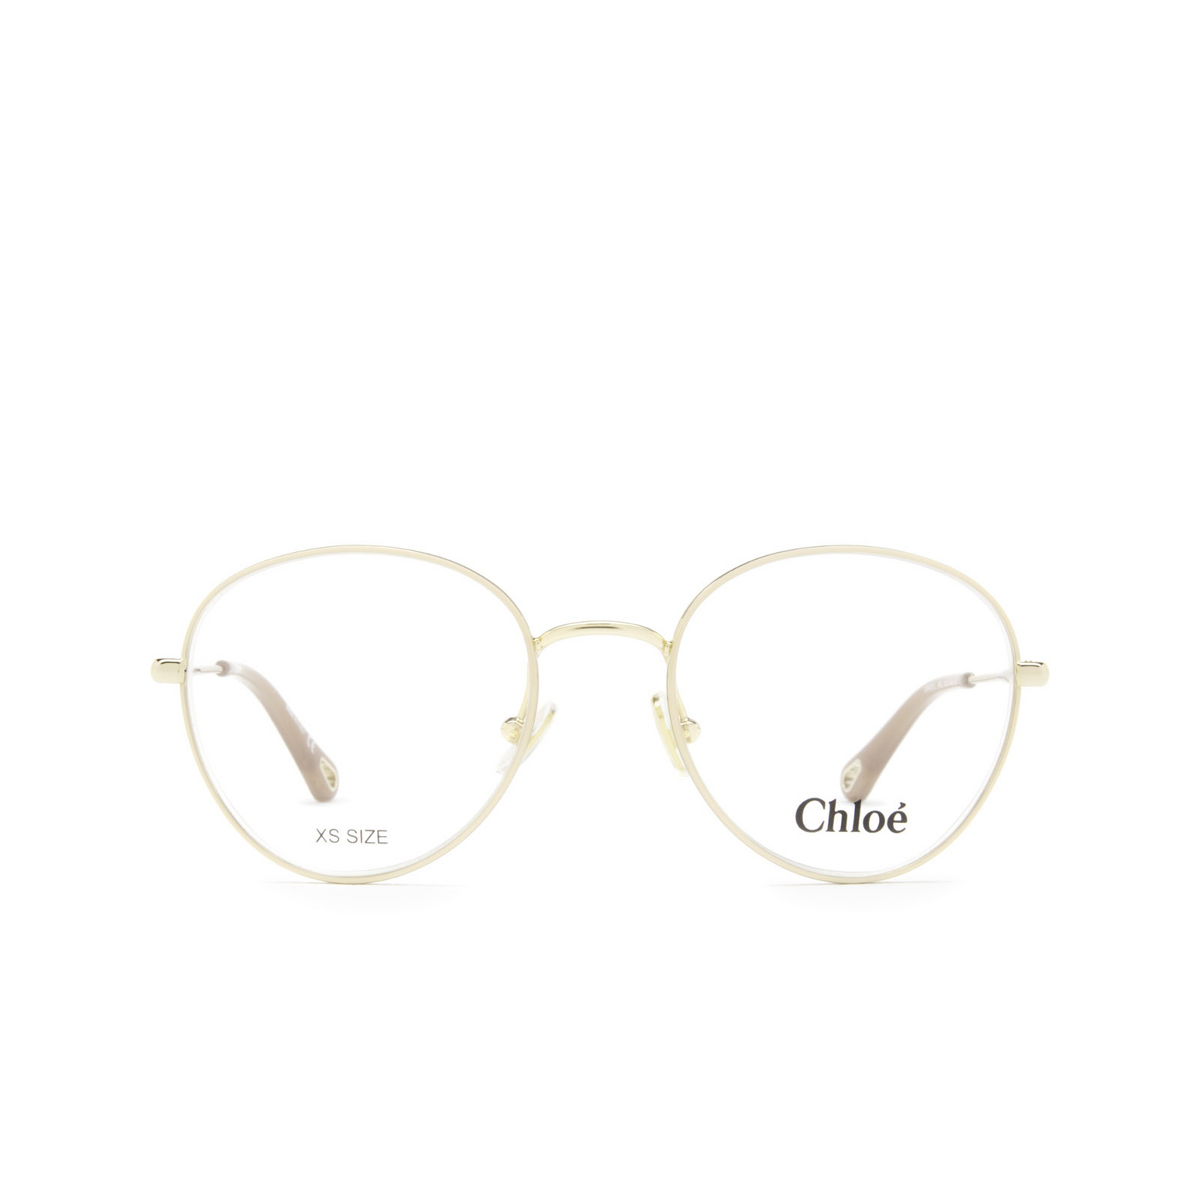 Chloé® Round Eyeglasses: CH0021O color Gold & Nude 009 - front view.